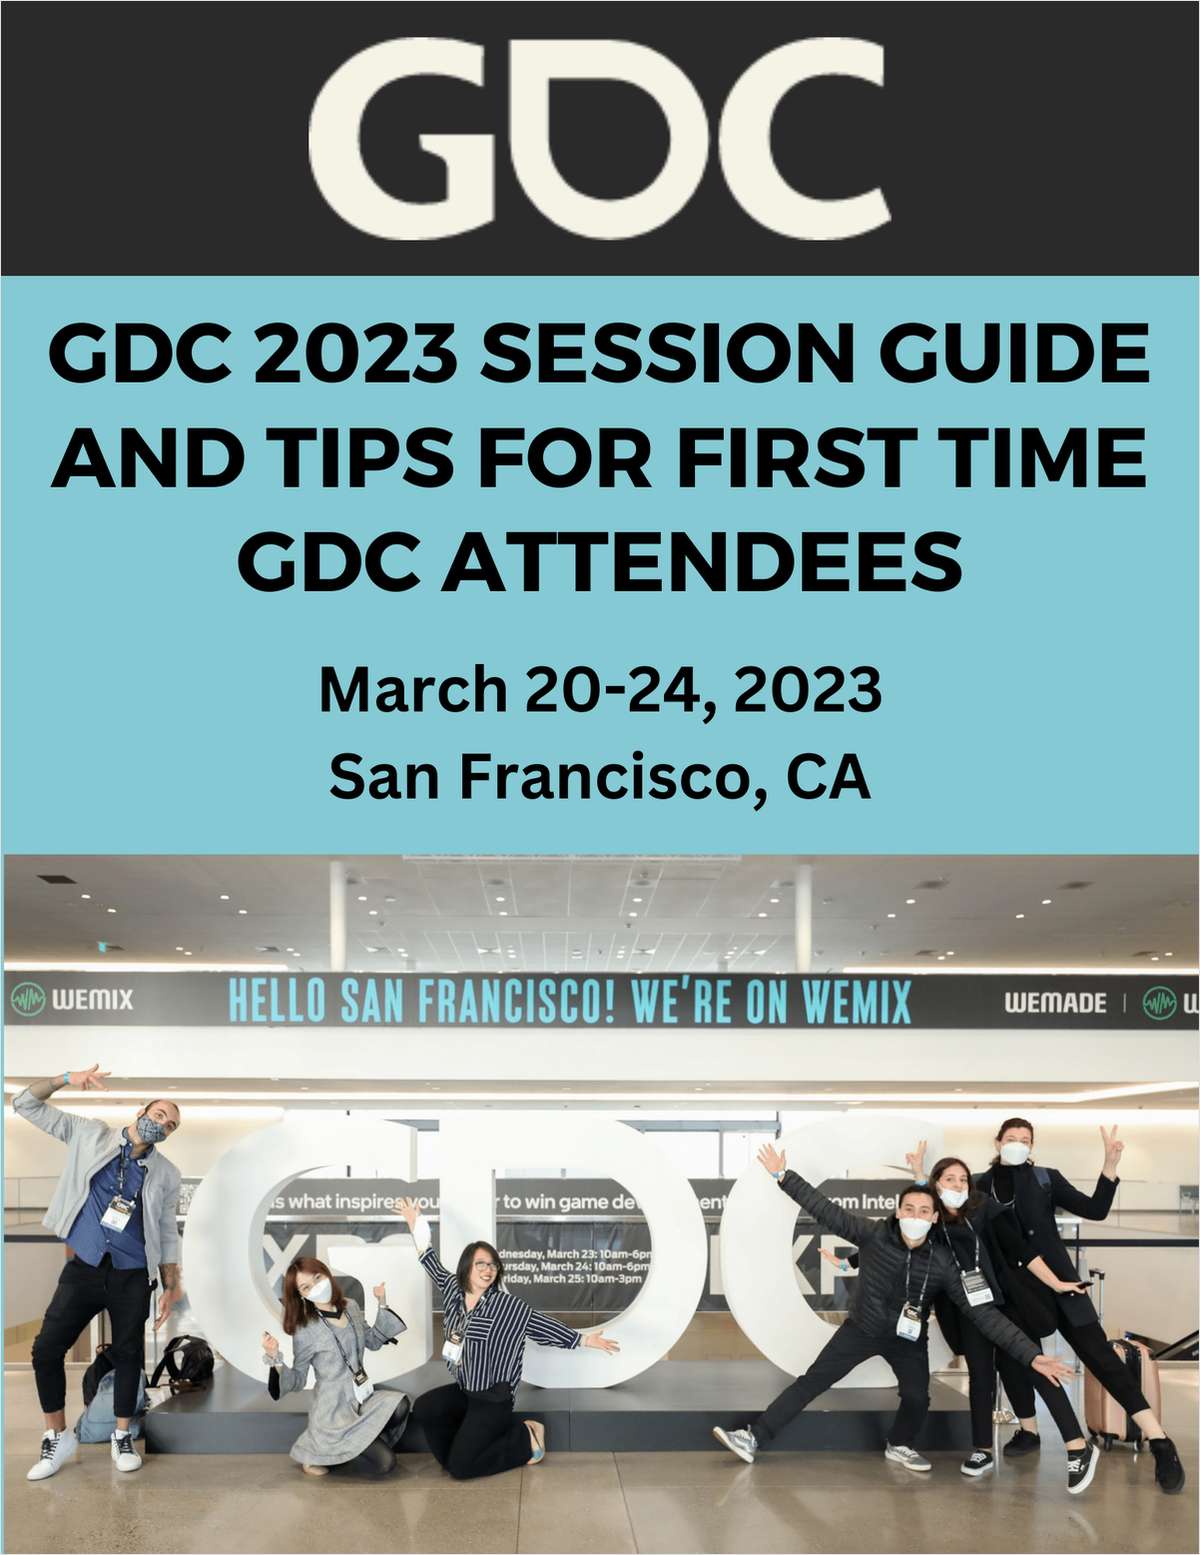 GDC 2023 Session Guide And Tips For First Time GDC Attendees